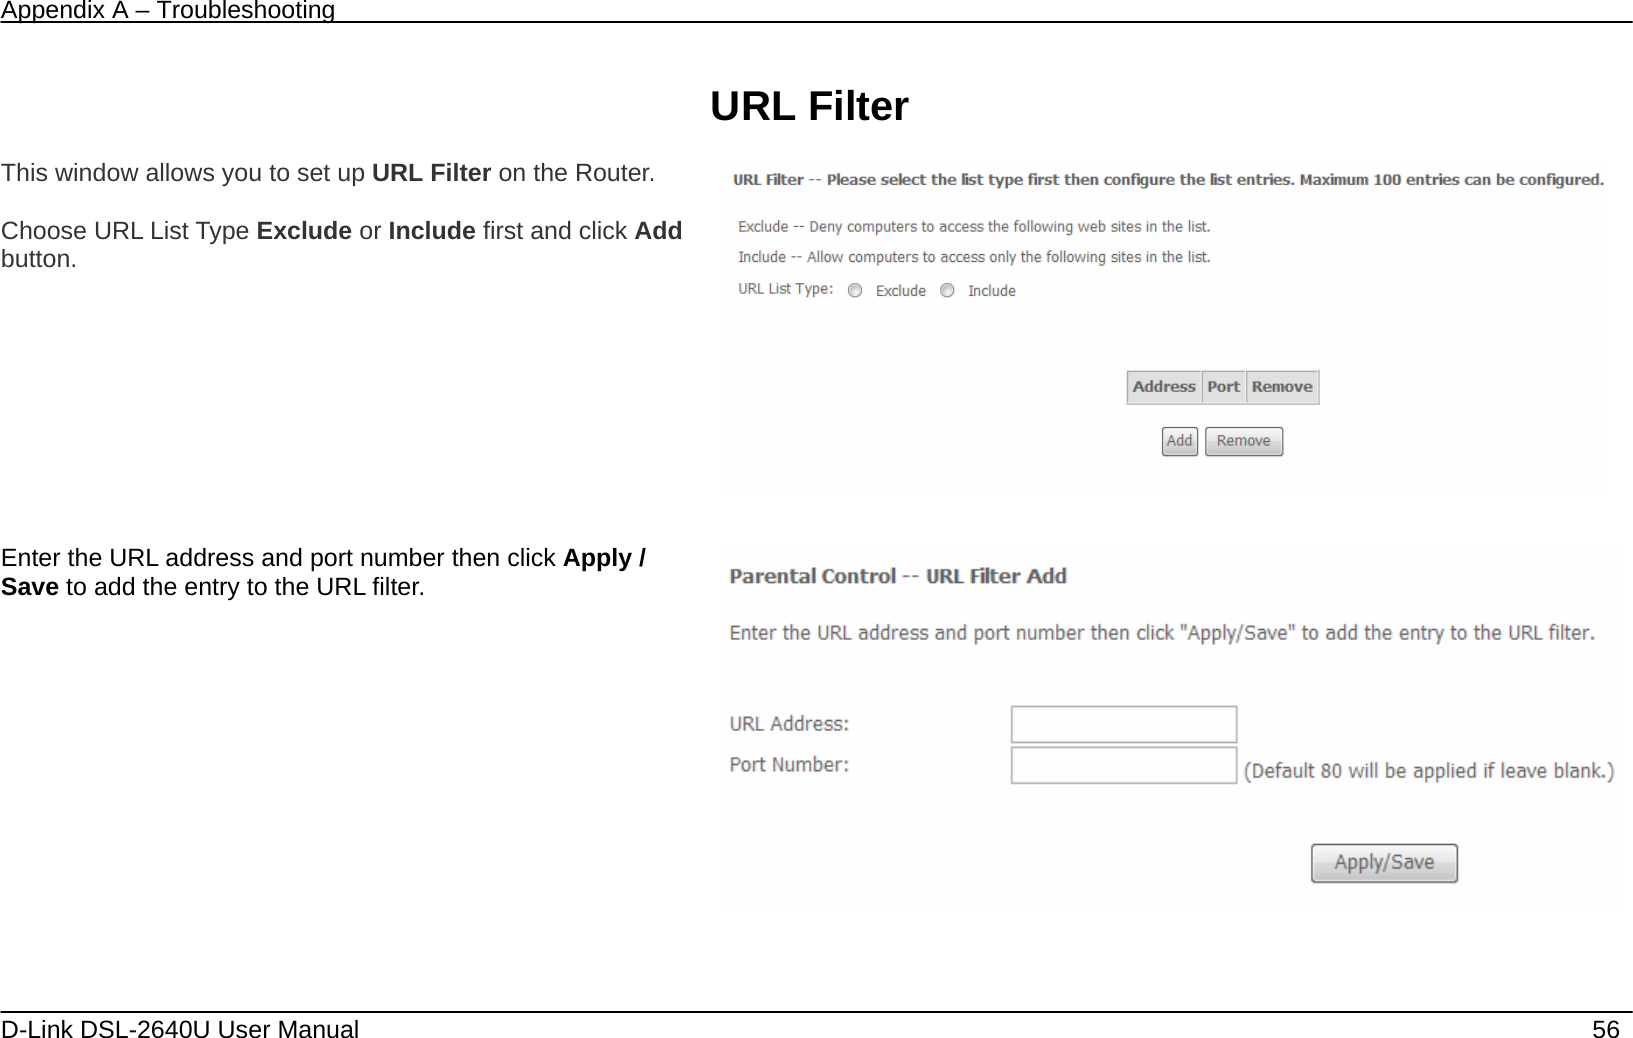 Appendix A – Troubleshooting   D-Link DSL-2640U User Manual    56  URL Filter  This window allows you to set up URL Filter on the Router.   Choose URL List Type Exclude or Include first and click Add button.    Enter the URL address and port number then click Apply / Save to add the entry to the URL filter.  